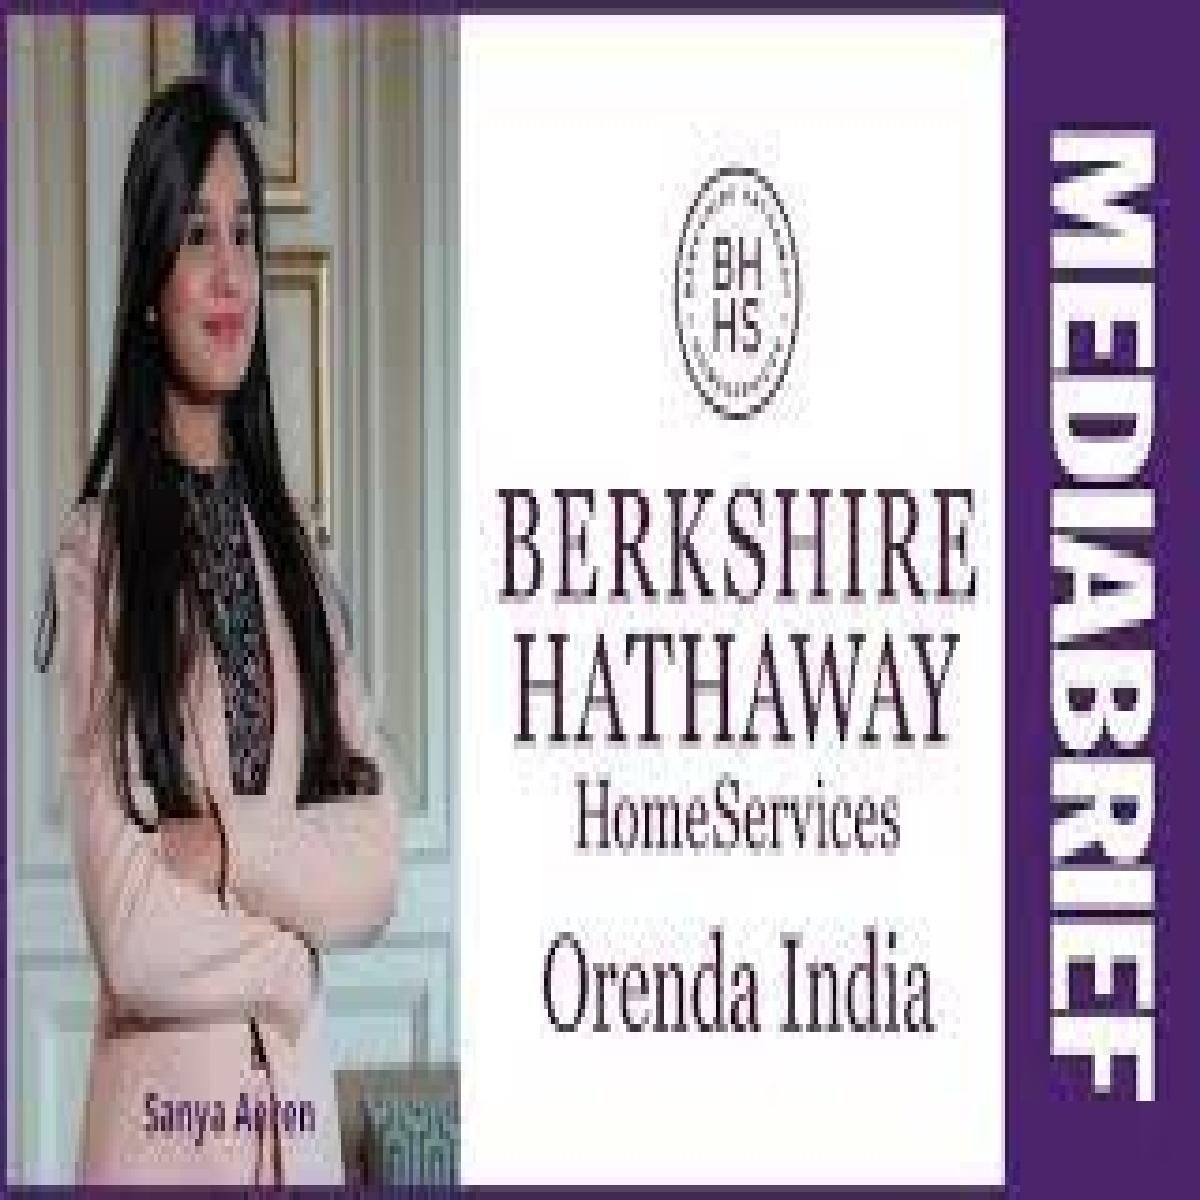 Berkshire Hathaway HomeServices Orenda India Expands Presence with Launch of New Mumbai Office